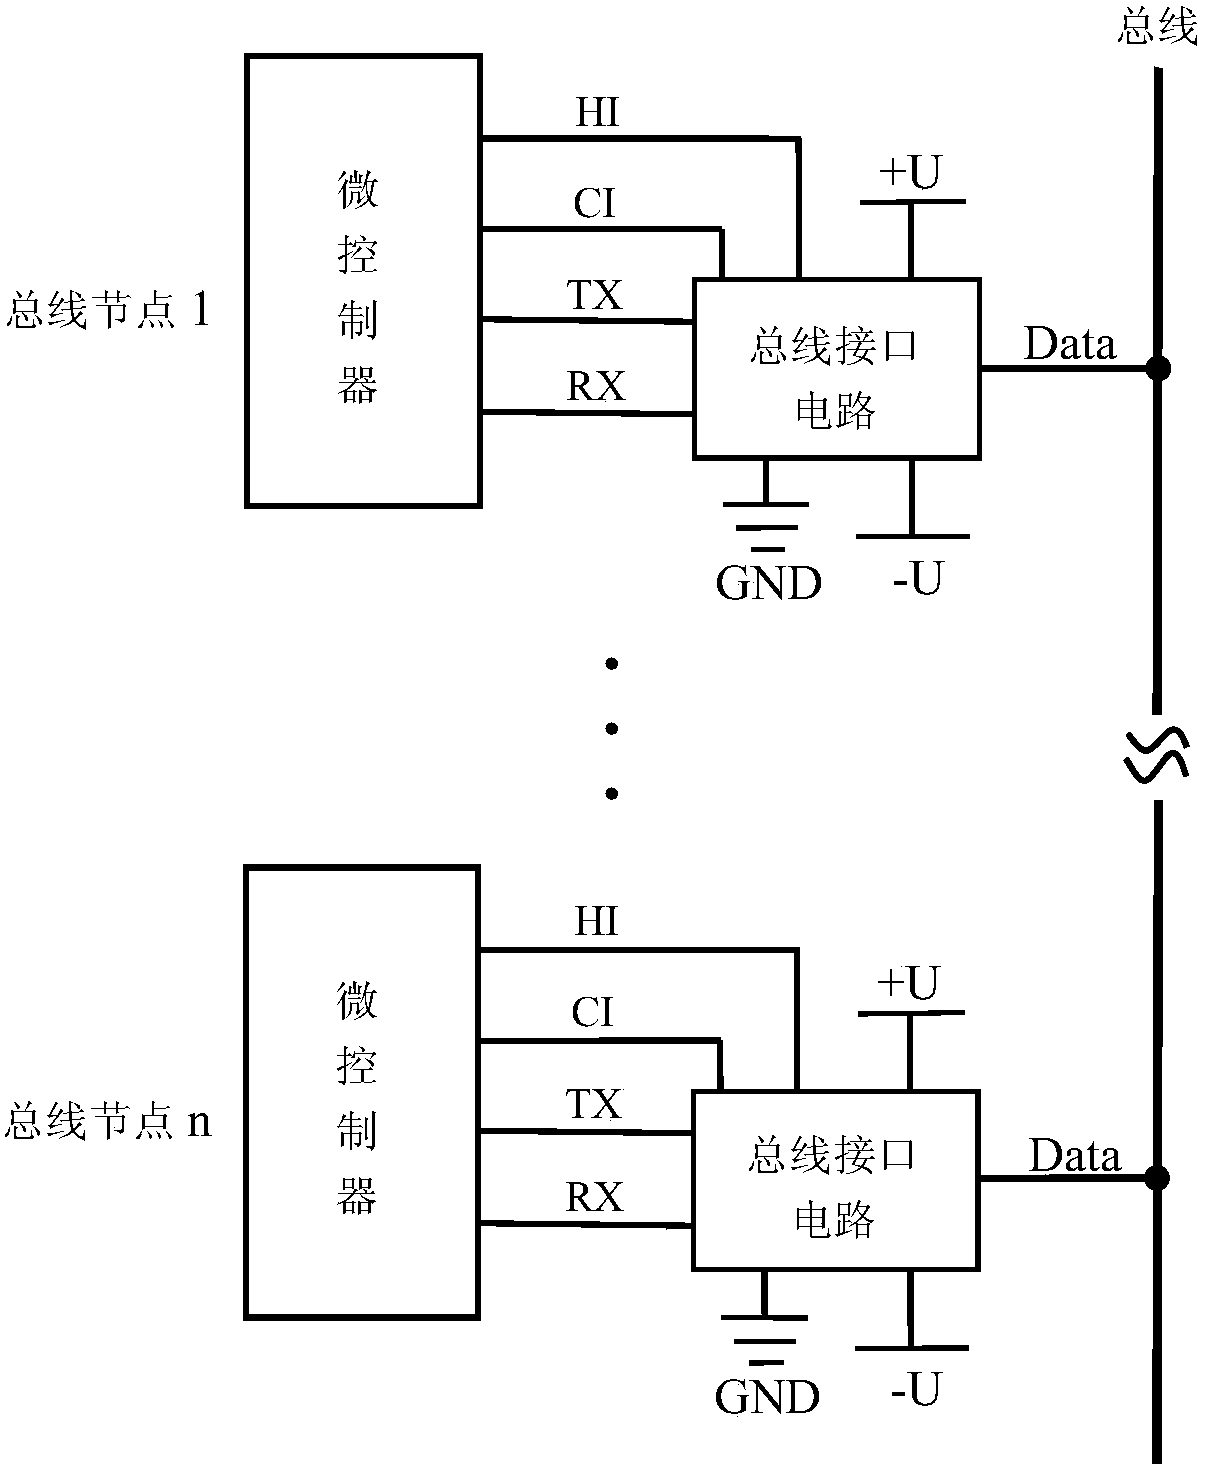 An Interface Circuit and Communication Protocol Based on Serial Bus Structure